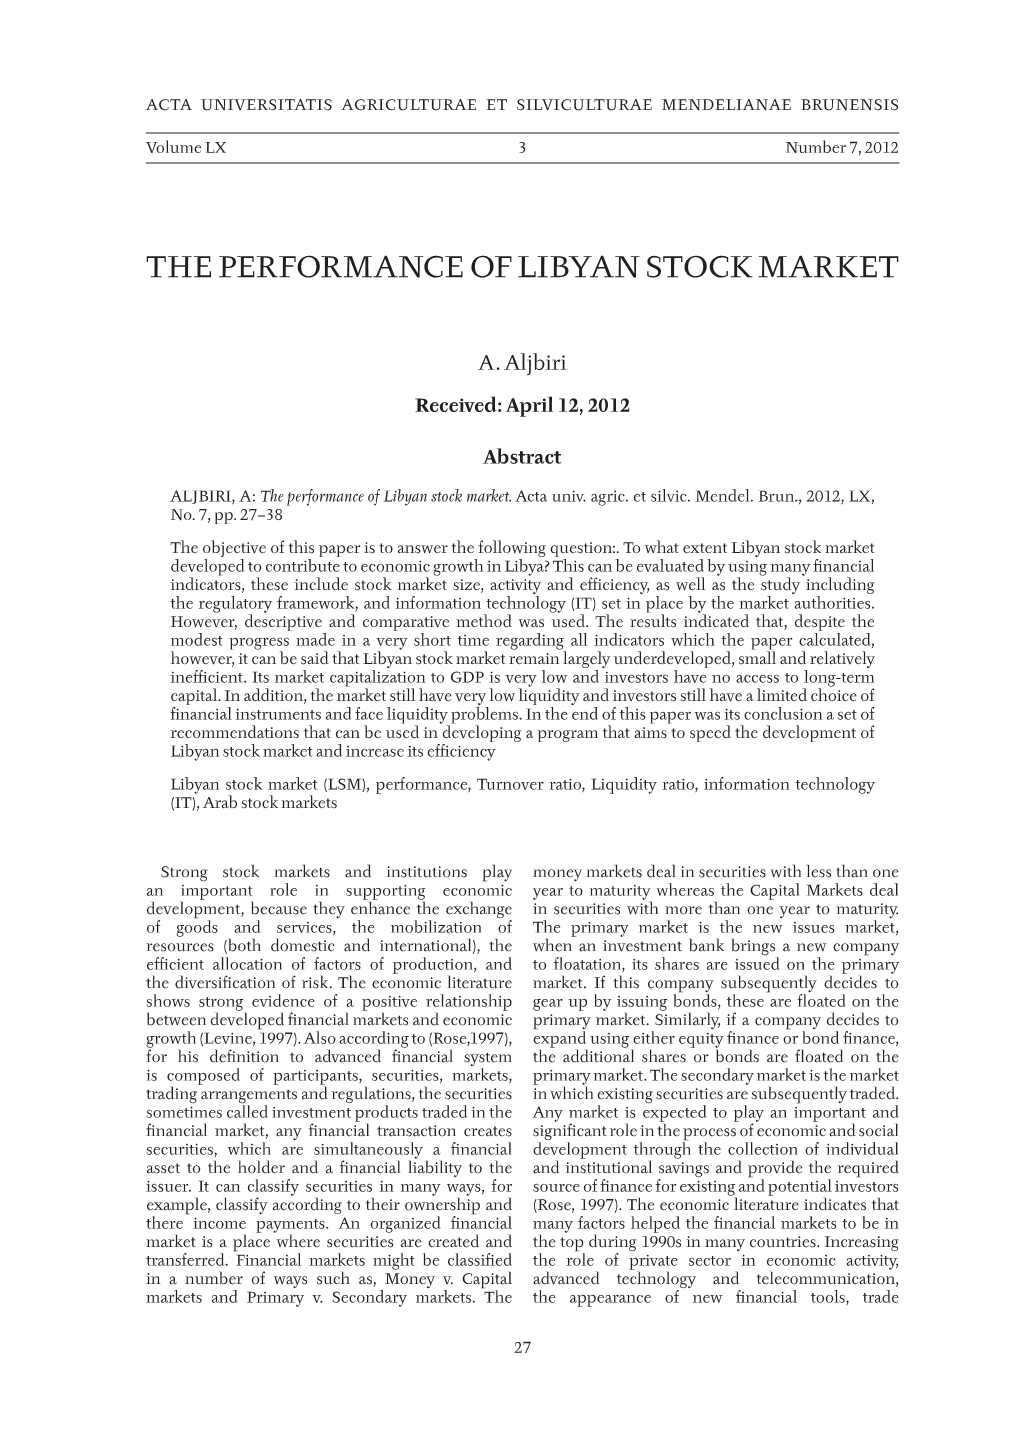 The Performance of Libyan Stock Market